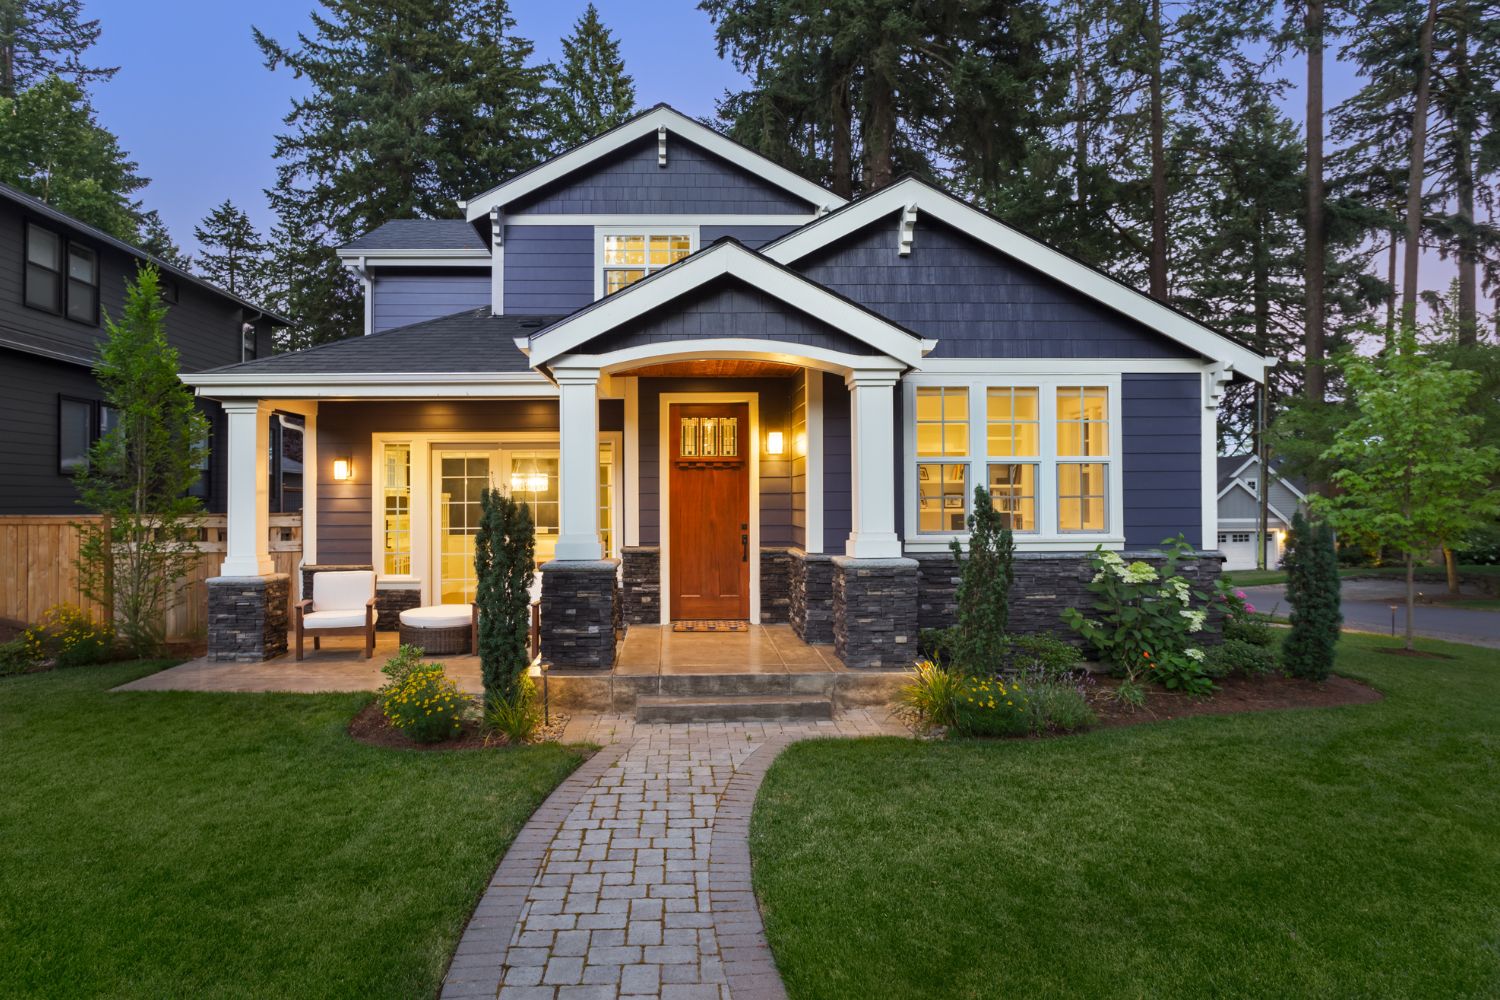 Financial Steps to Secure Your Dream Home: 10 Ways to Prep for Homebuying